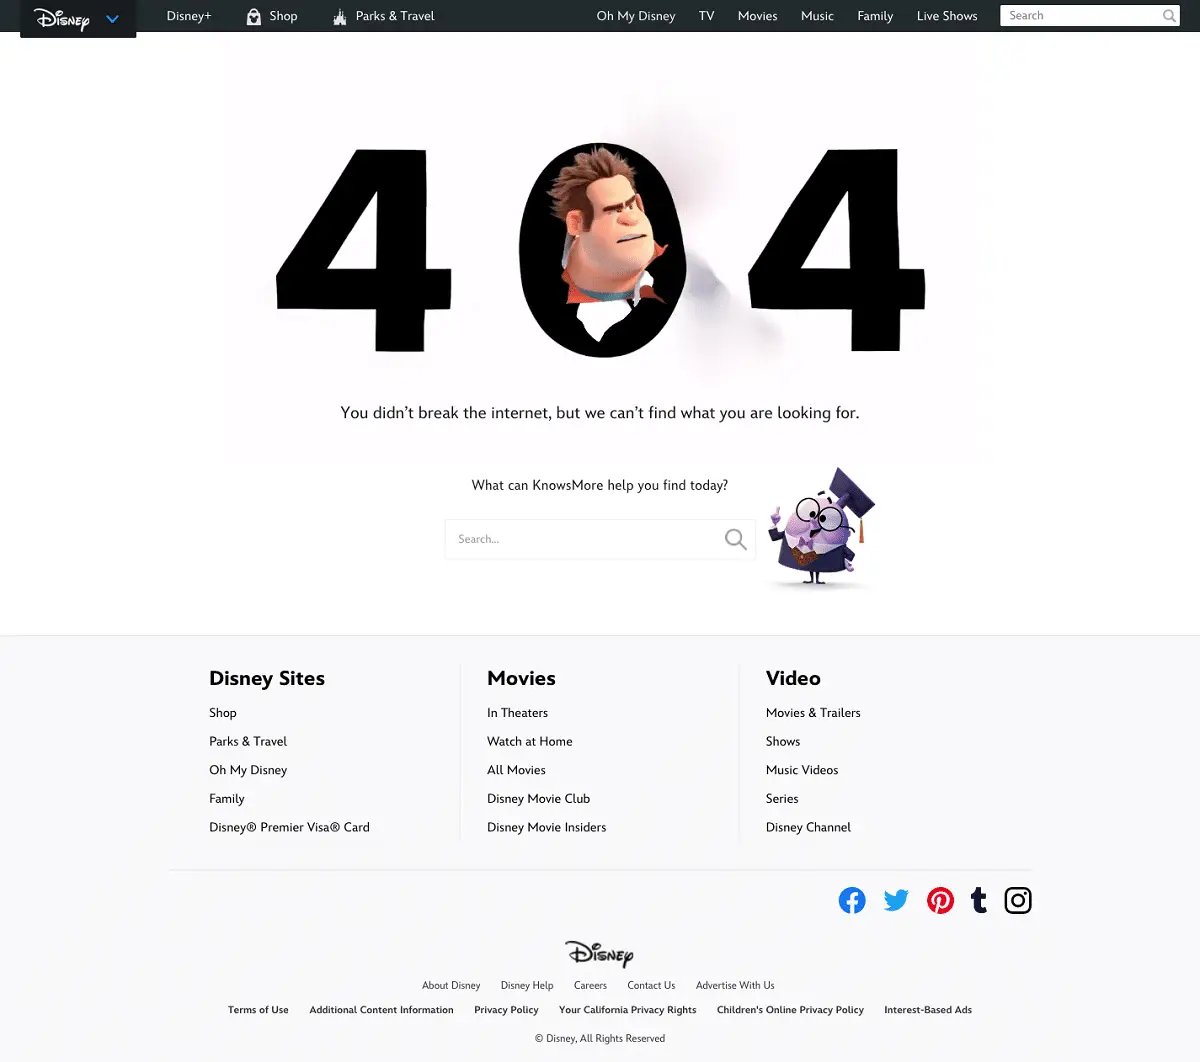 Screenshot of Disney's 404 error page, which features an image of Wreck-It Ralph from the movie Ralph Breaks the Internet.